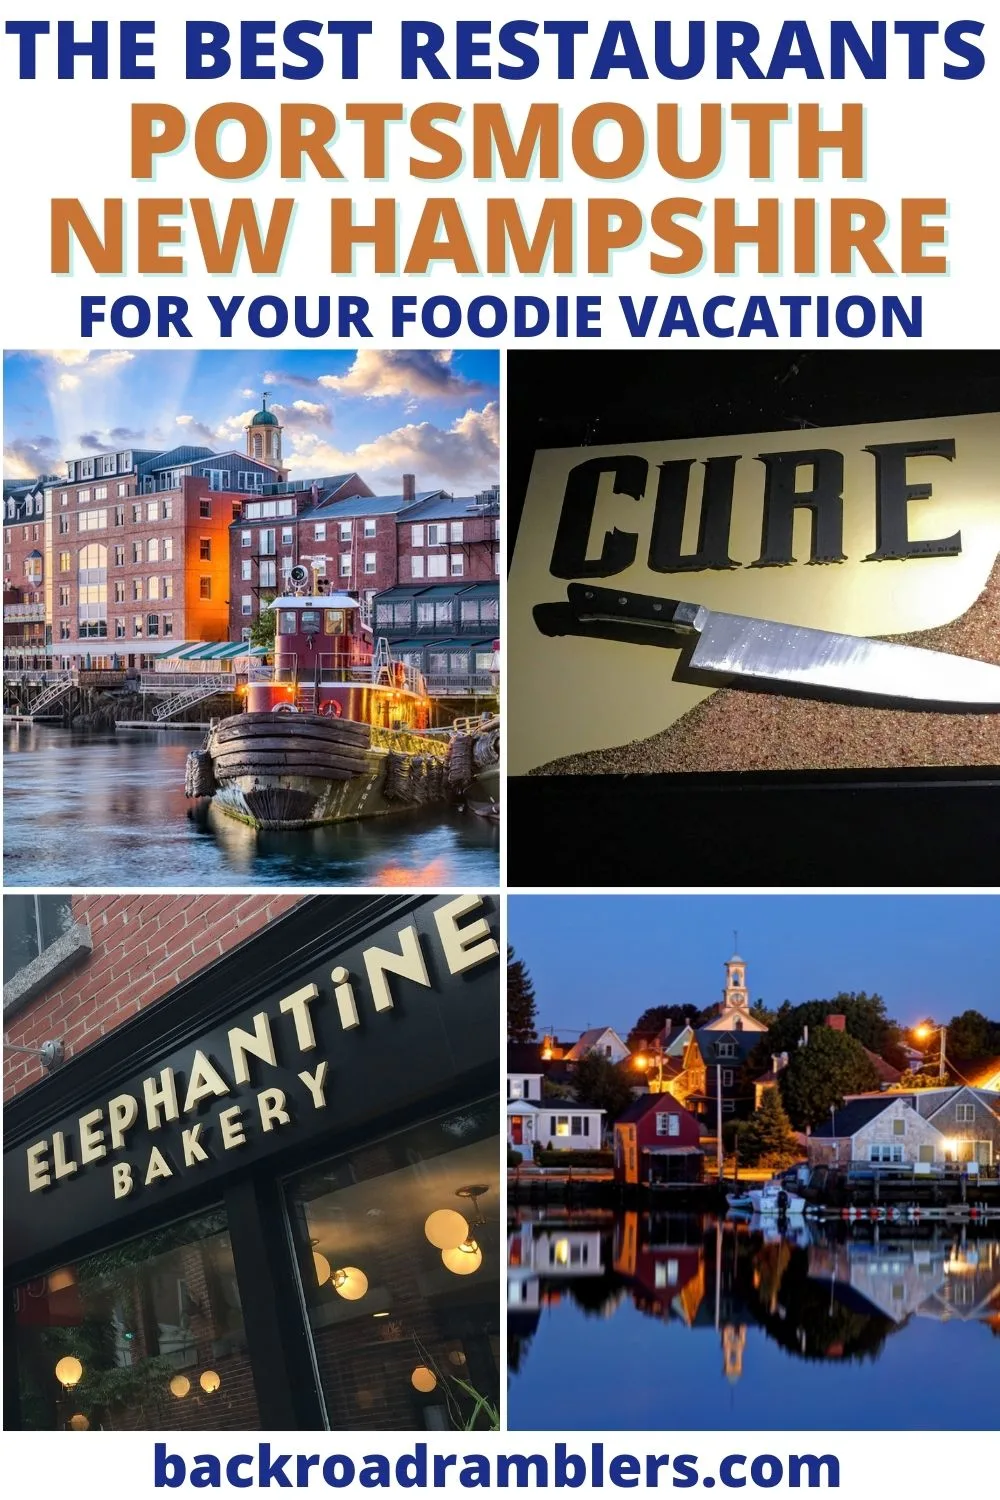 A collection of photos featuring restaurants in portsmouth nh.